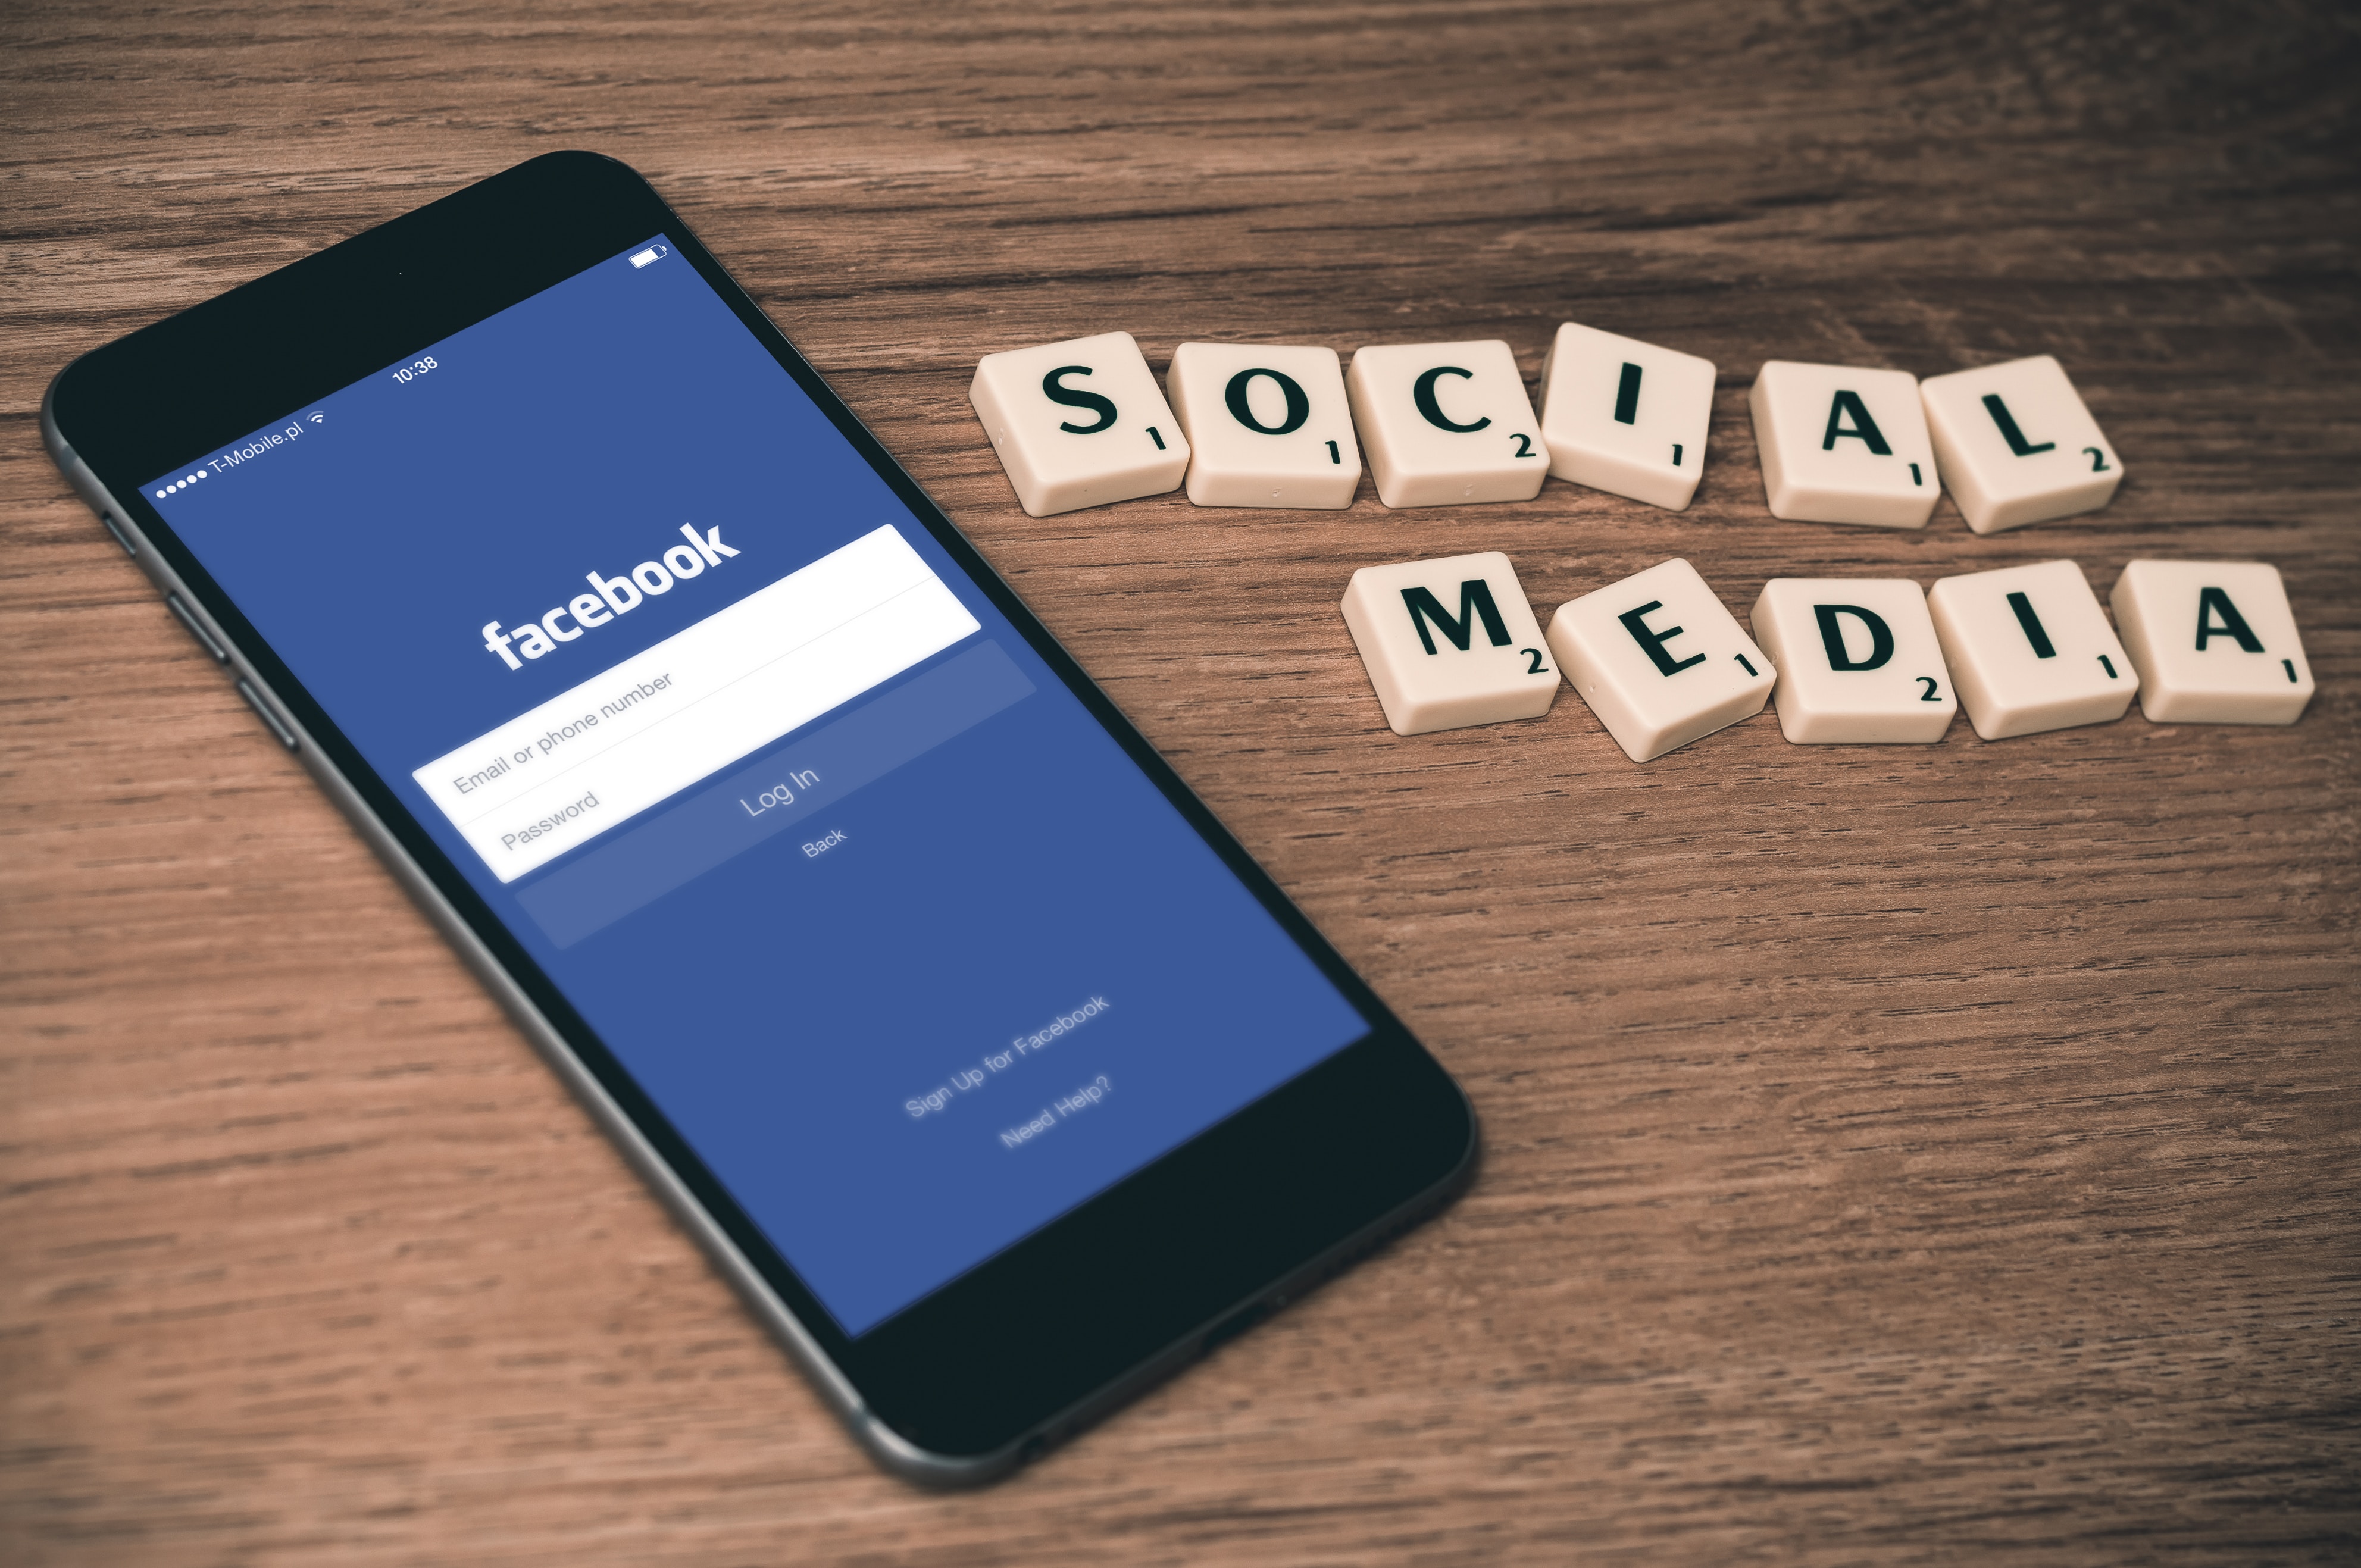 Facebook app on a phone Photo by William Iven on Unsplash